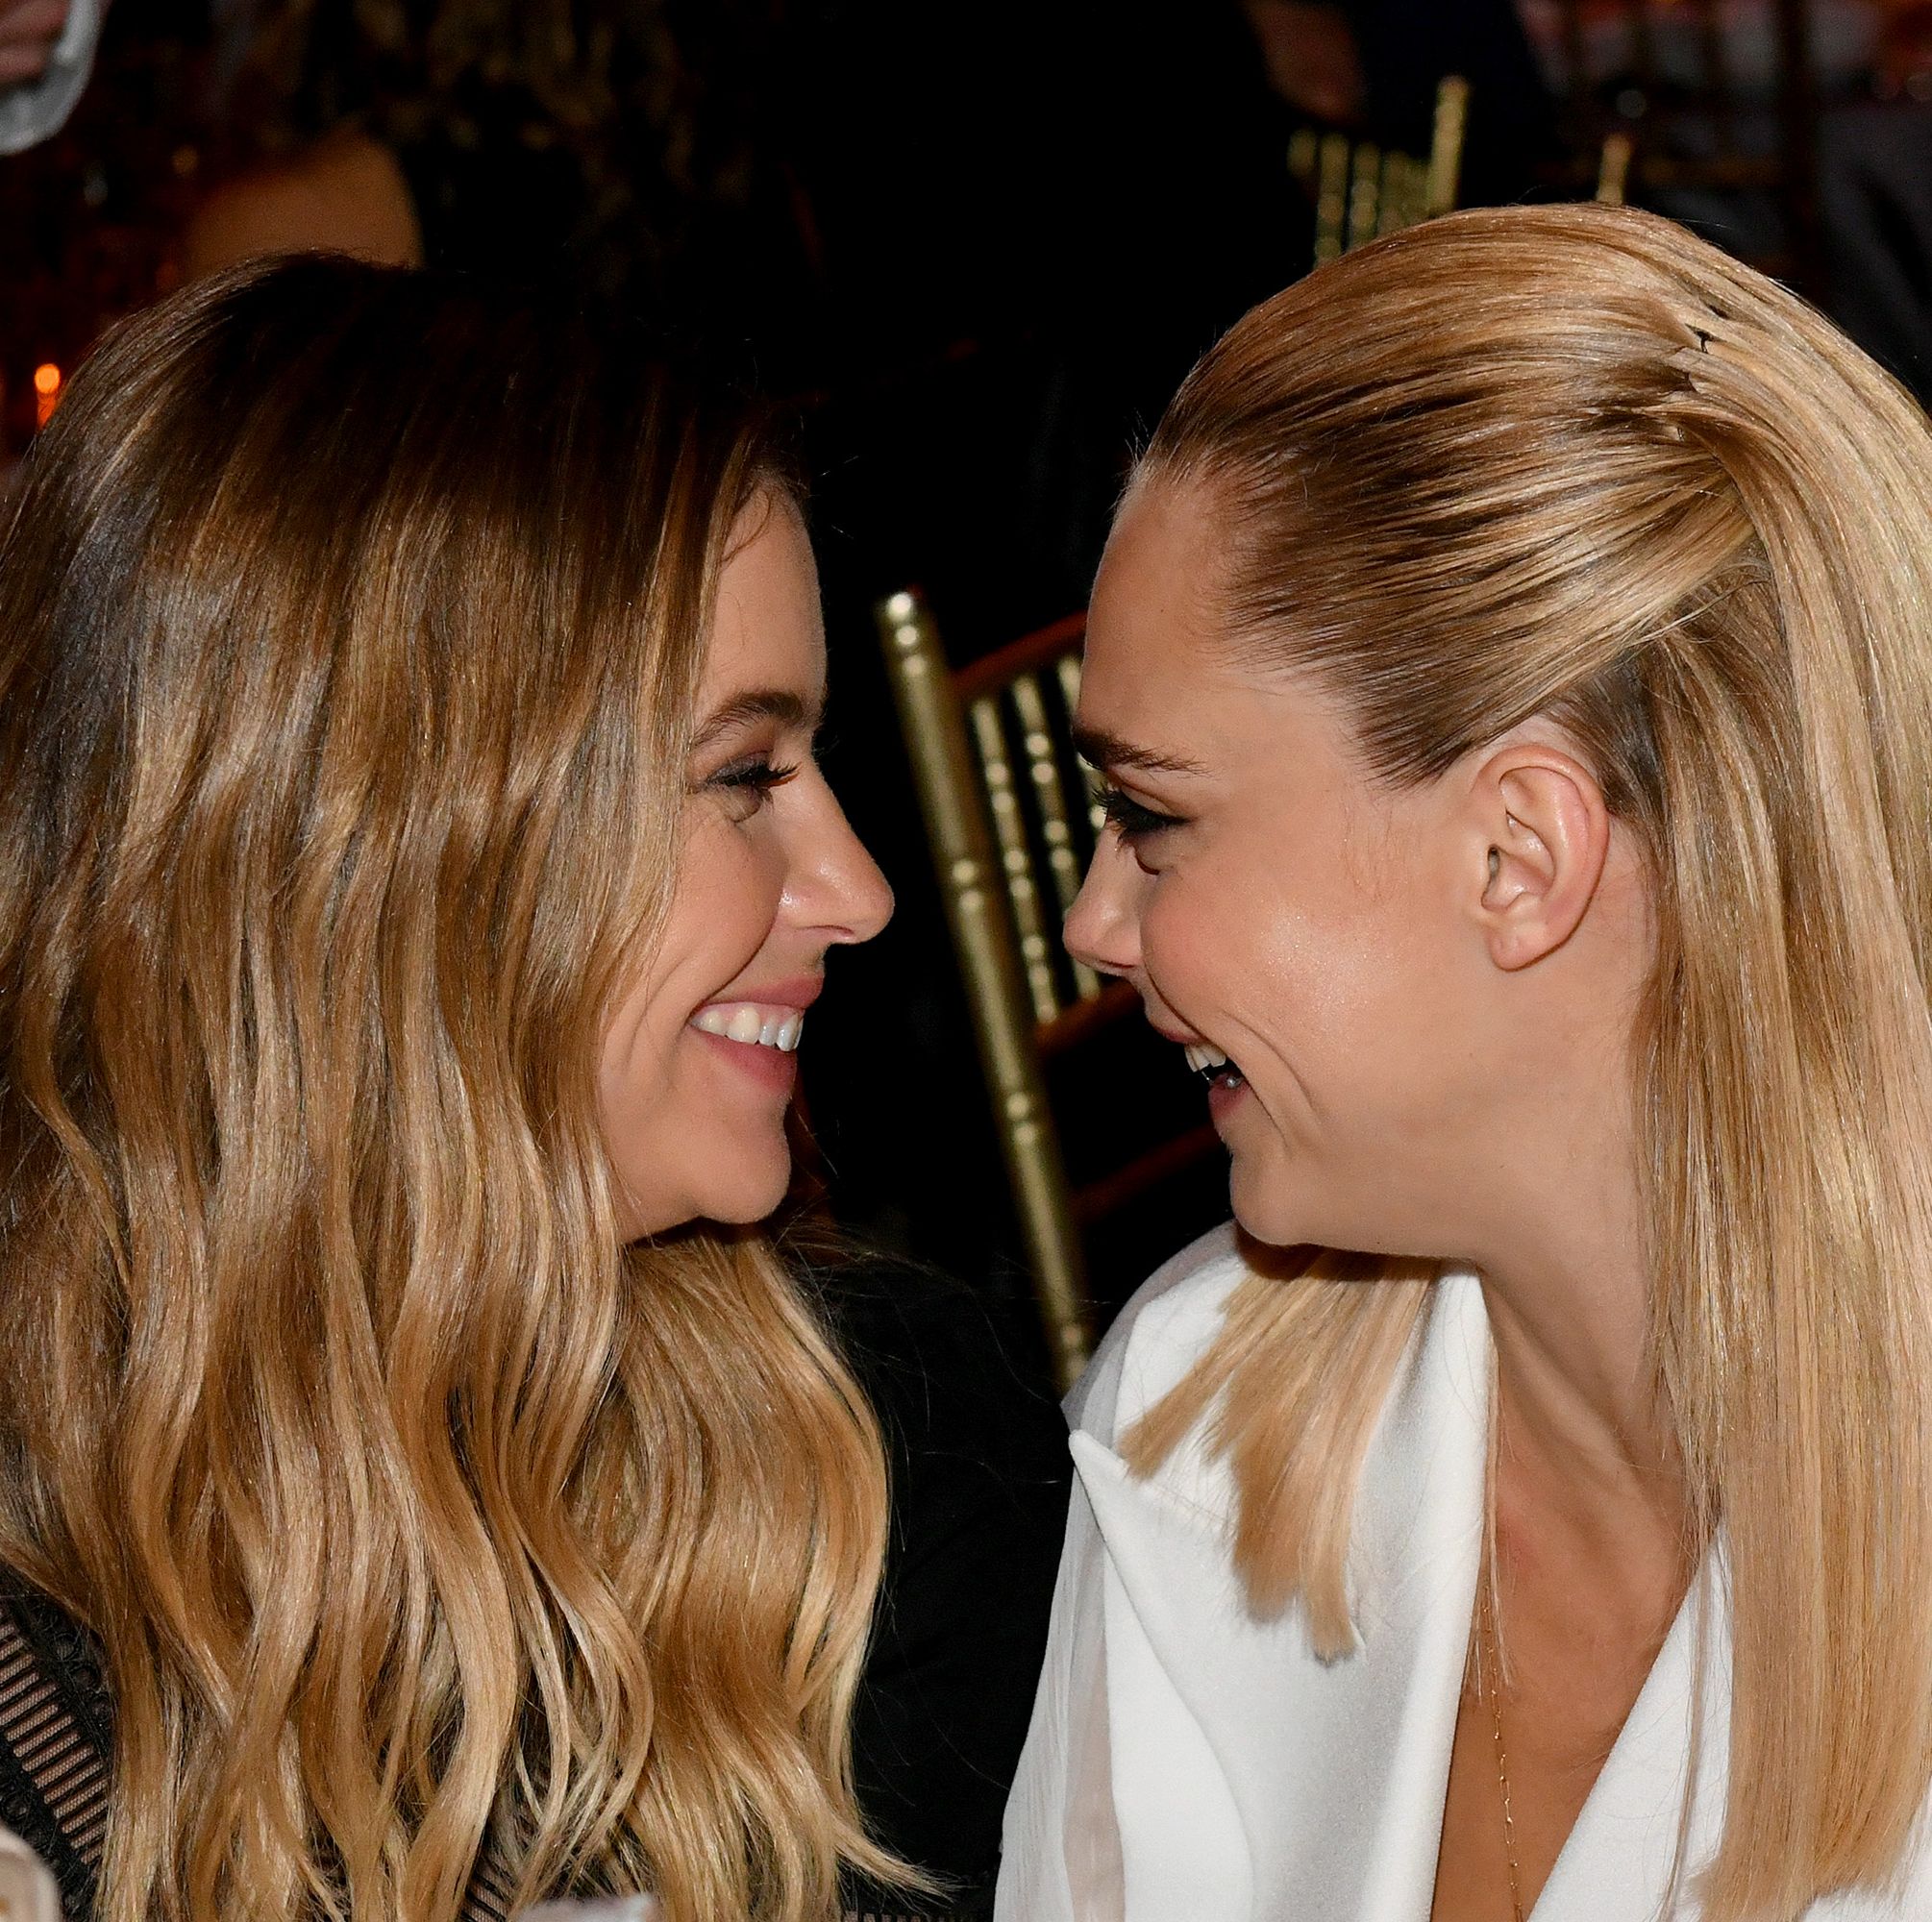 Cara Delevingne on How She and Ashley Benson Fell in Love When They ‘Weren’t Looking For It’